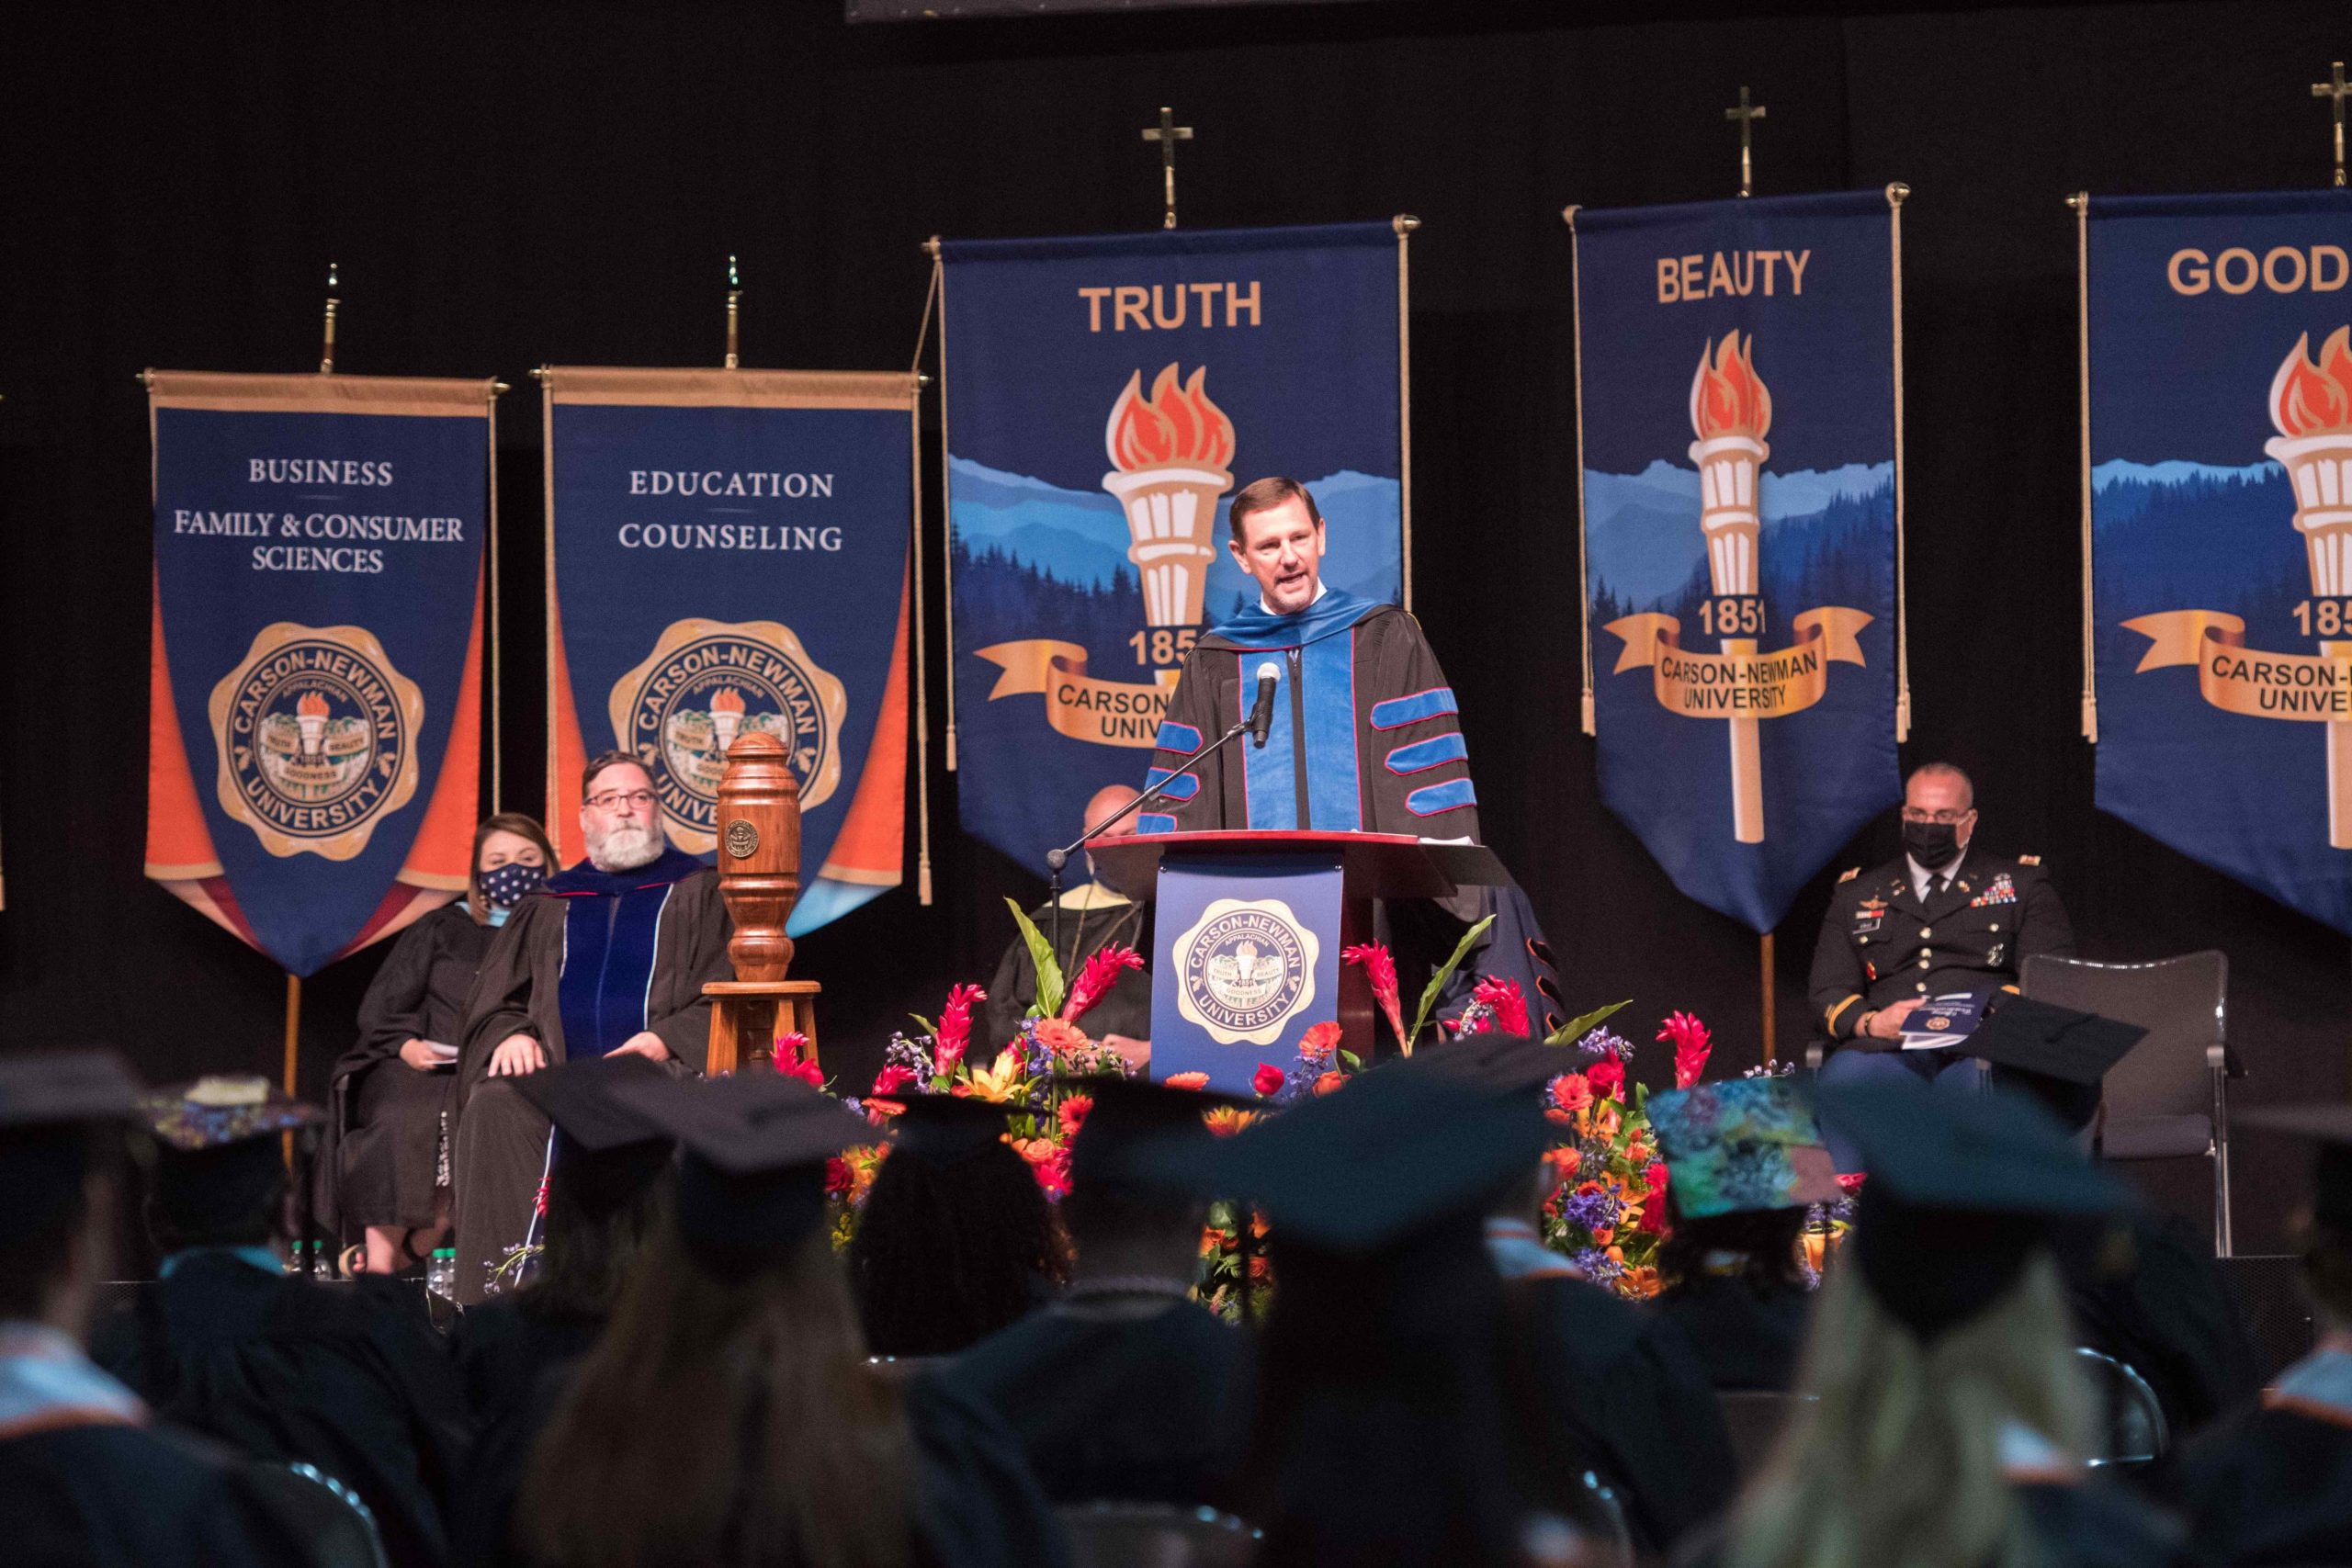 Carson-Newman University graduates hear from Dr. Paul Chitwood, president of the International Mission Board, during the May 7 Spring Commencement ceremonies at the Gatlinburg Convention Center.